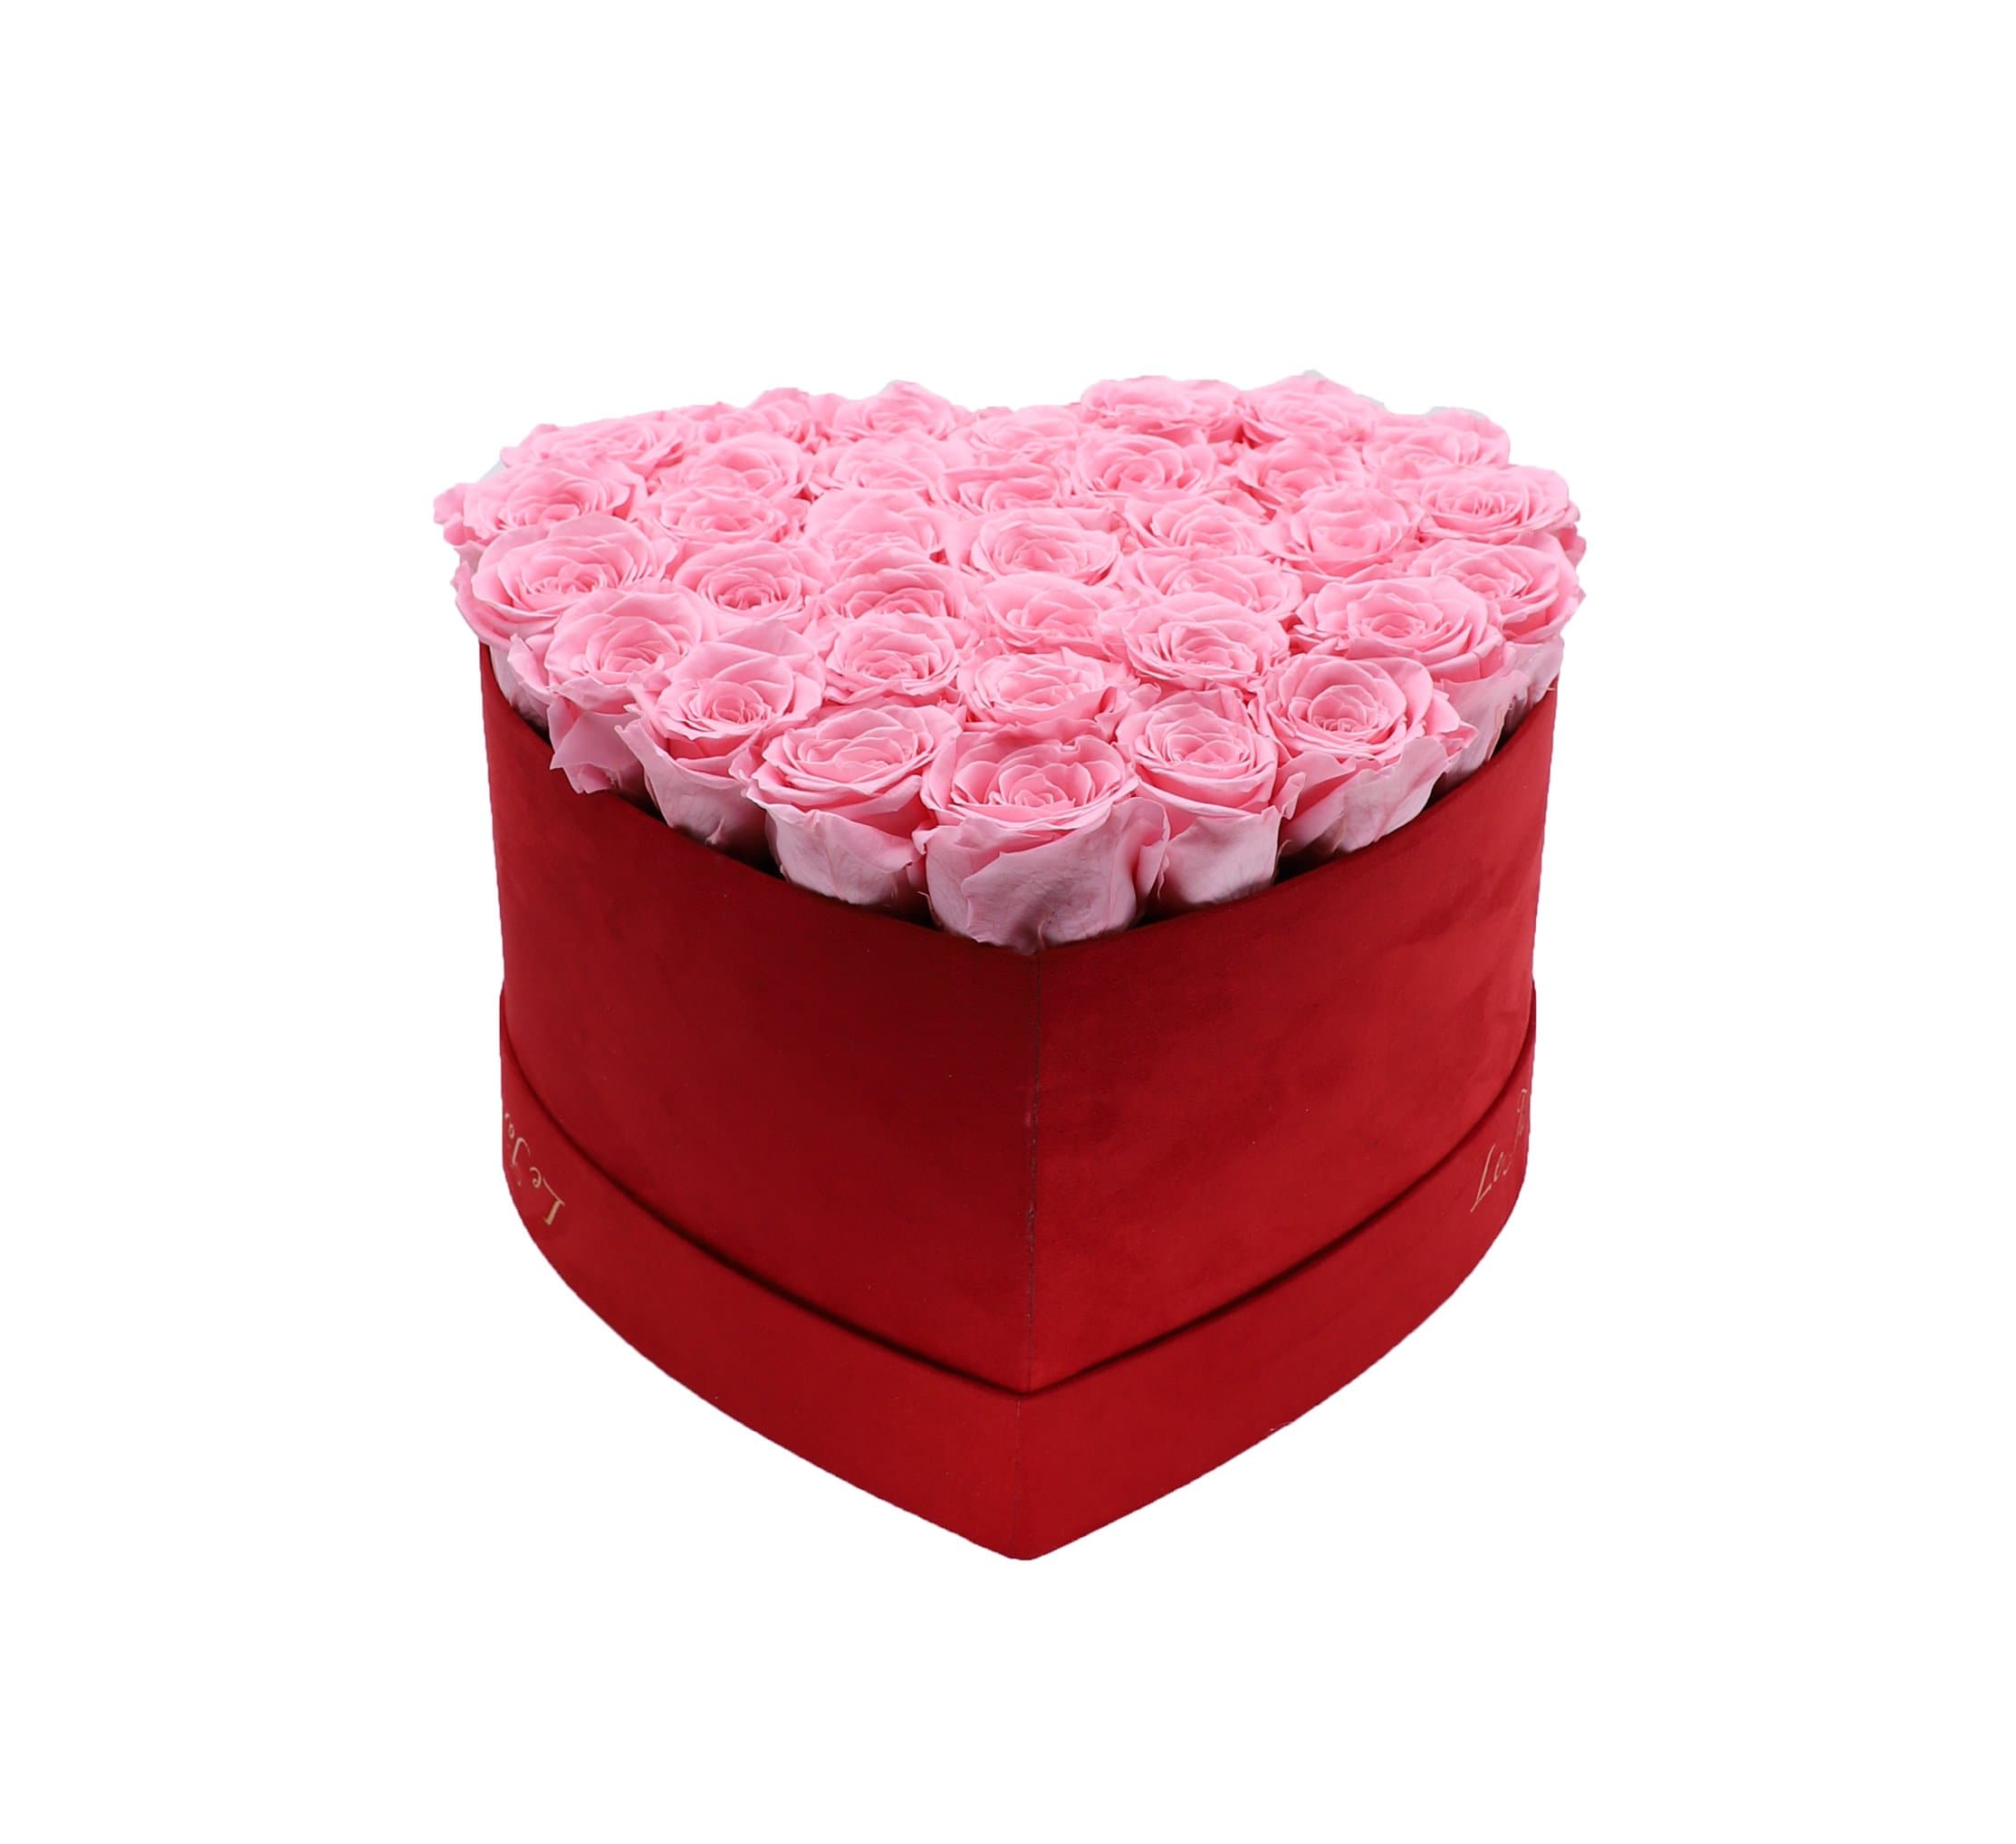 Pink Preserved Roses in A Heart Shaped Box- Small Heart Luxury Red Suede Box - Le Jardin Infini Roses in a Box